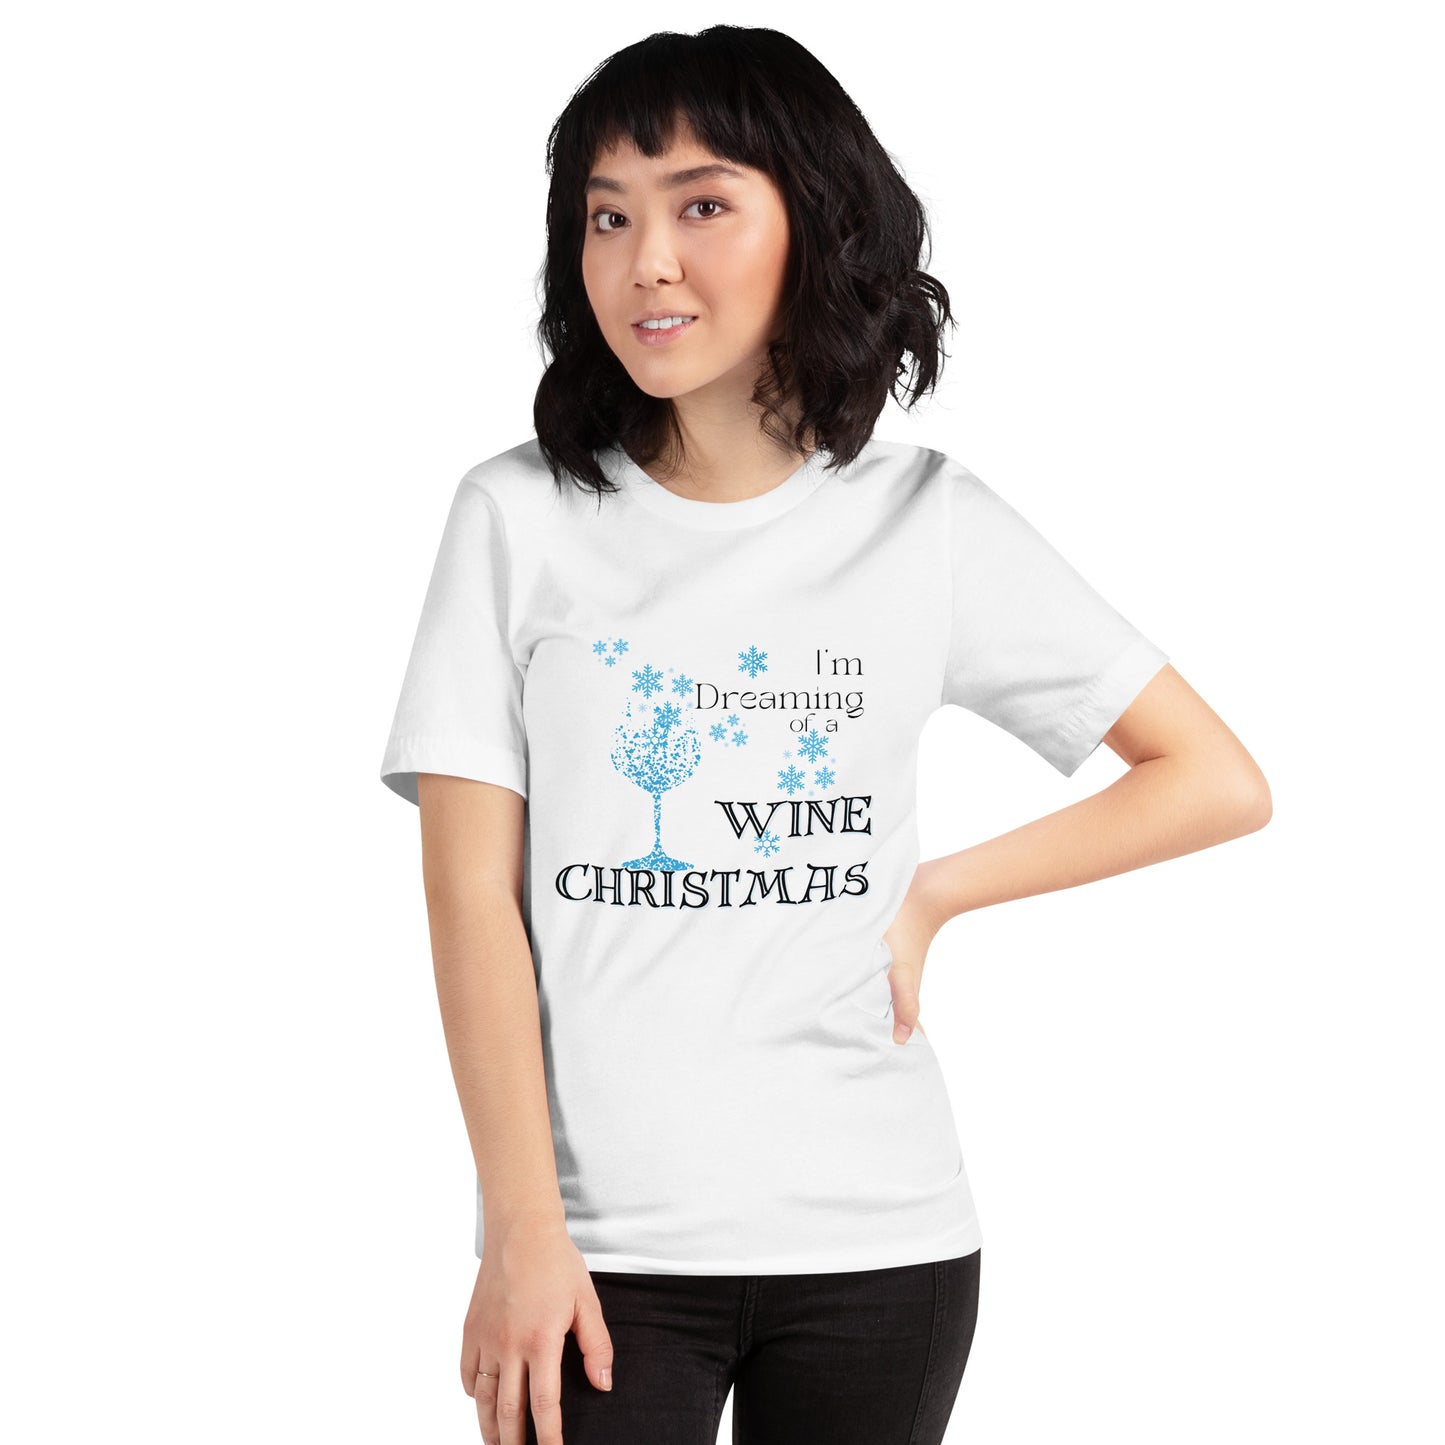 Dreaming of a Wine Christmas t-shirt